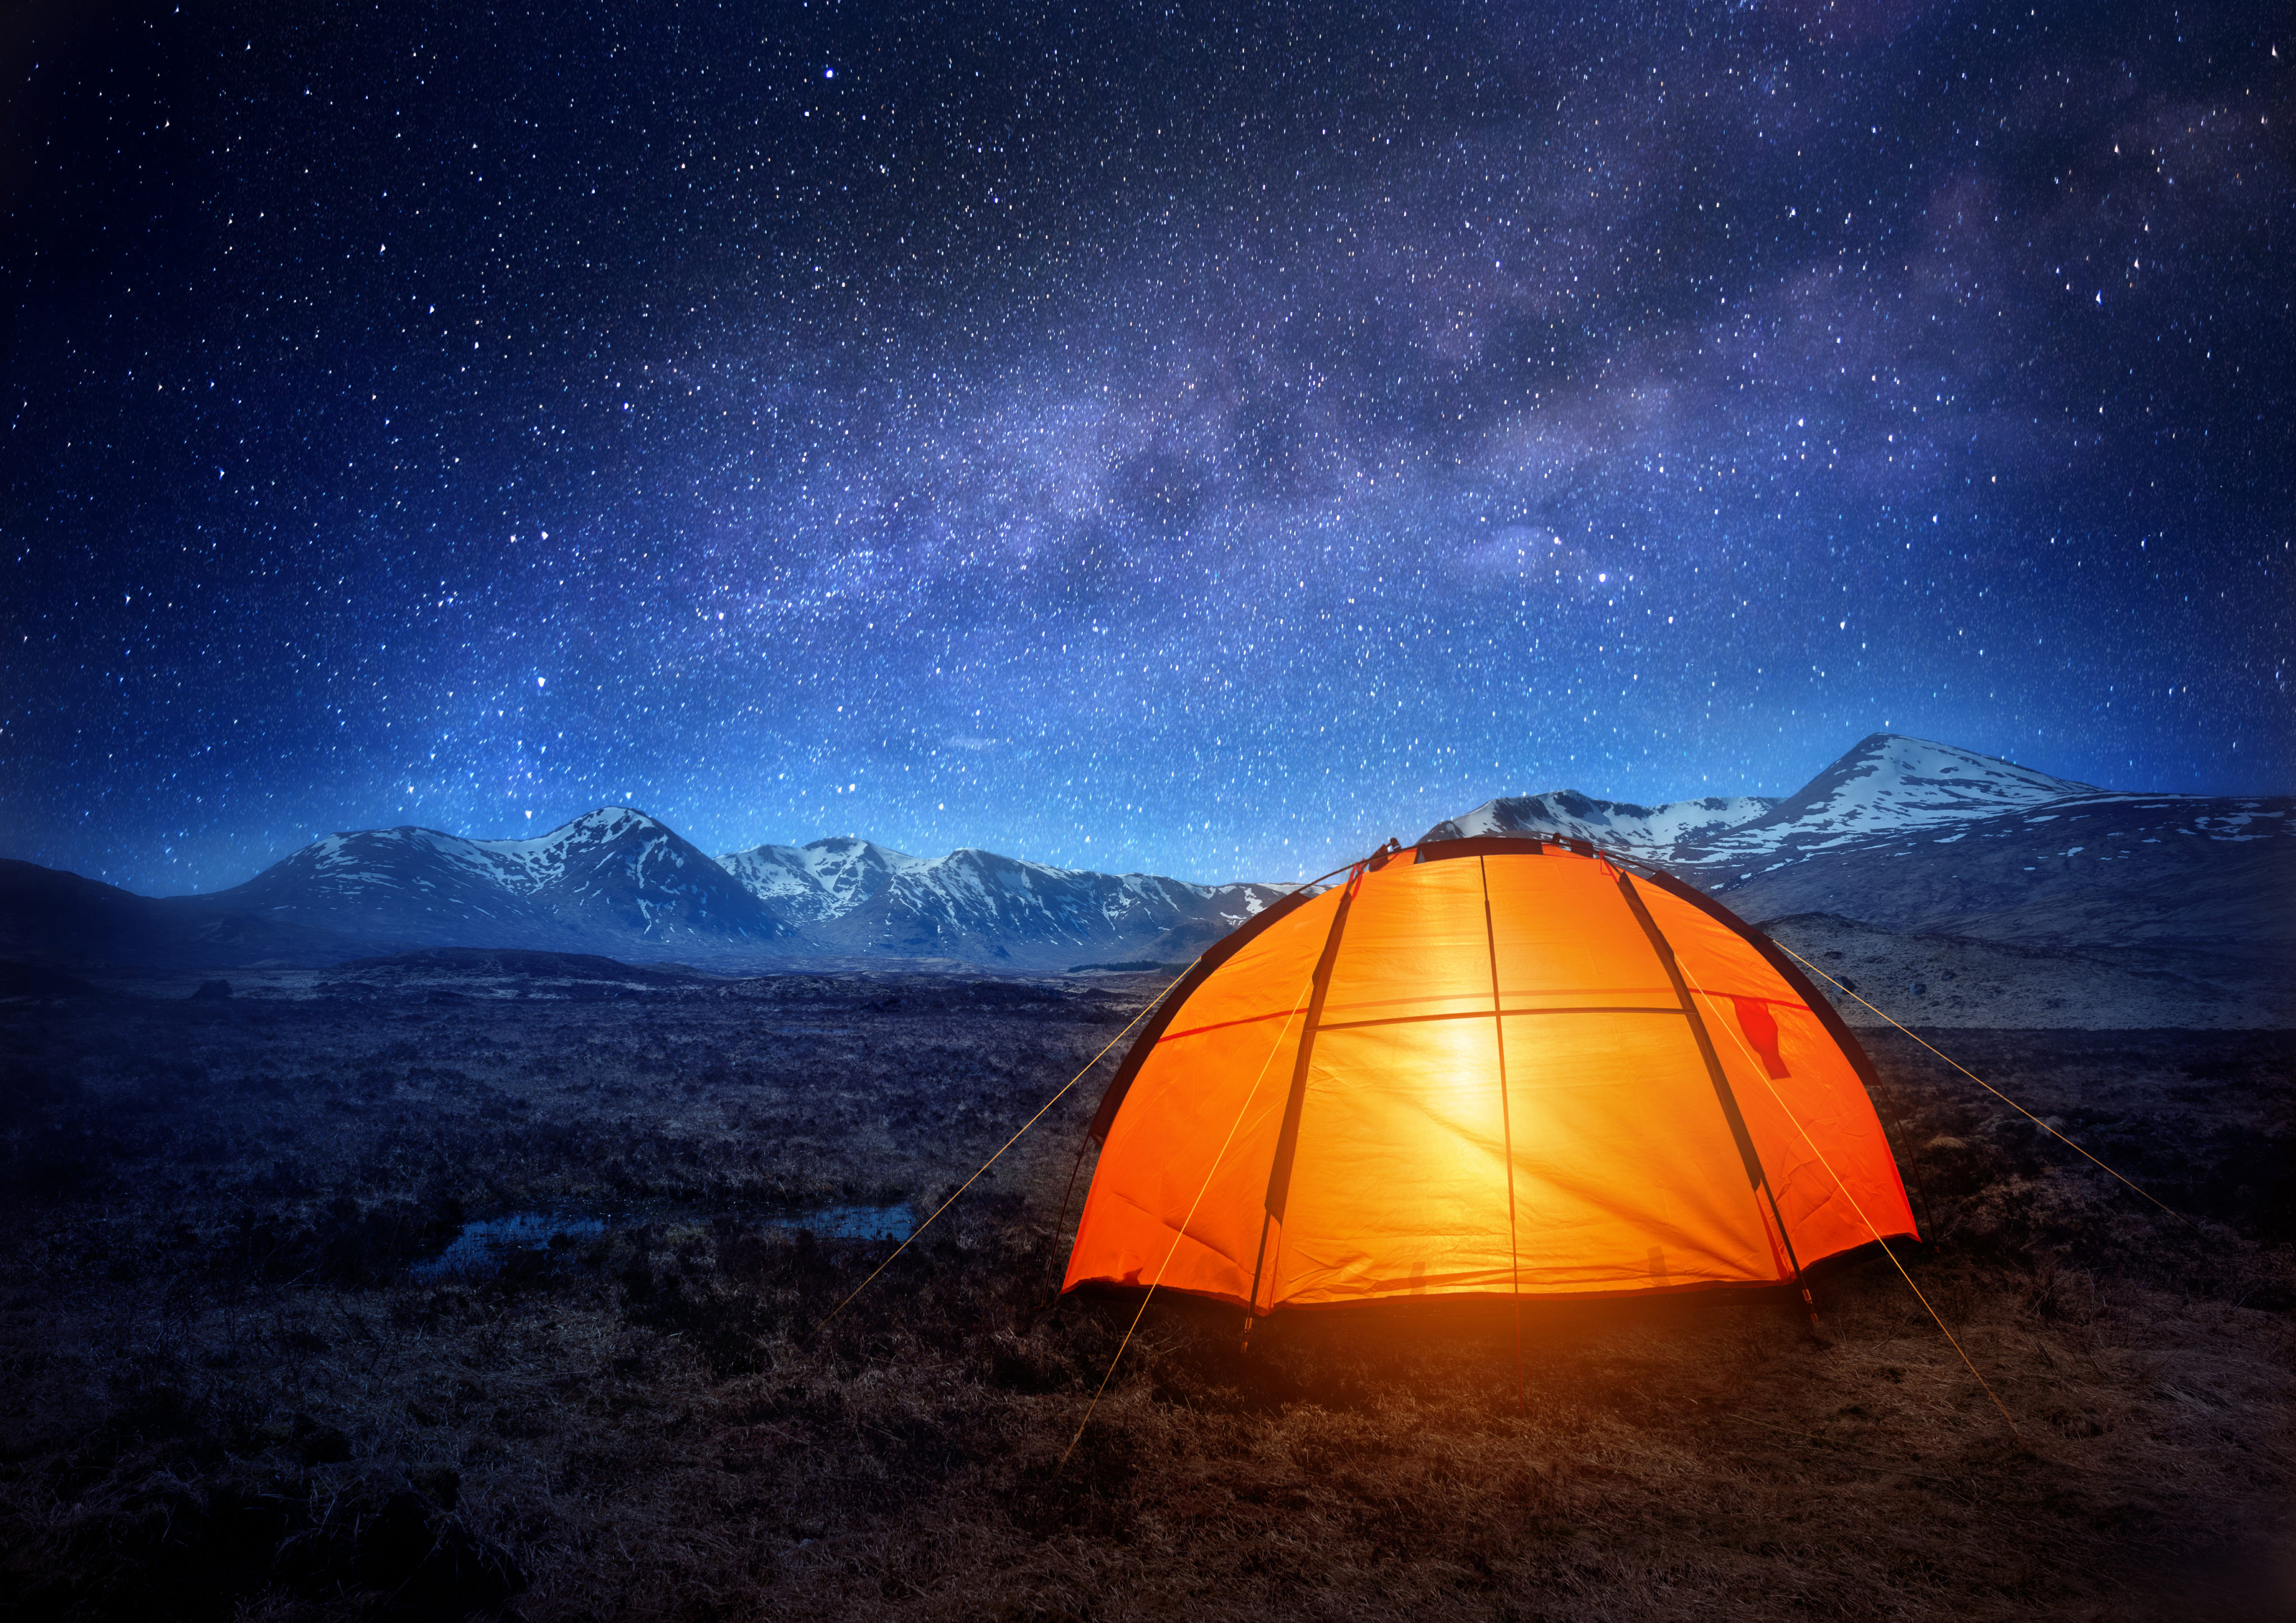 16-essential-things-for-camping-in-comfort-money-talks-news